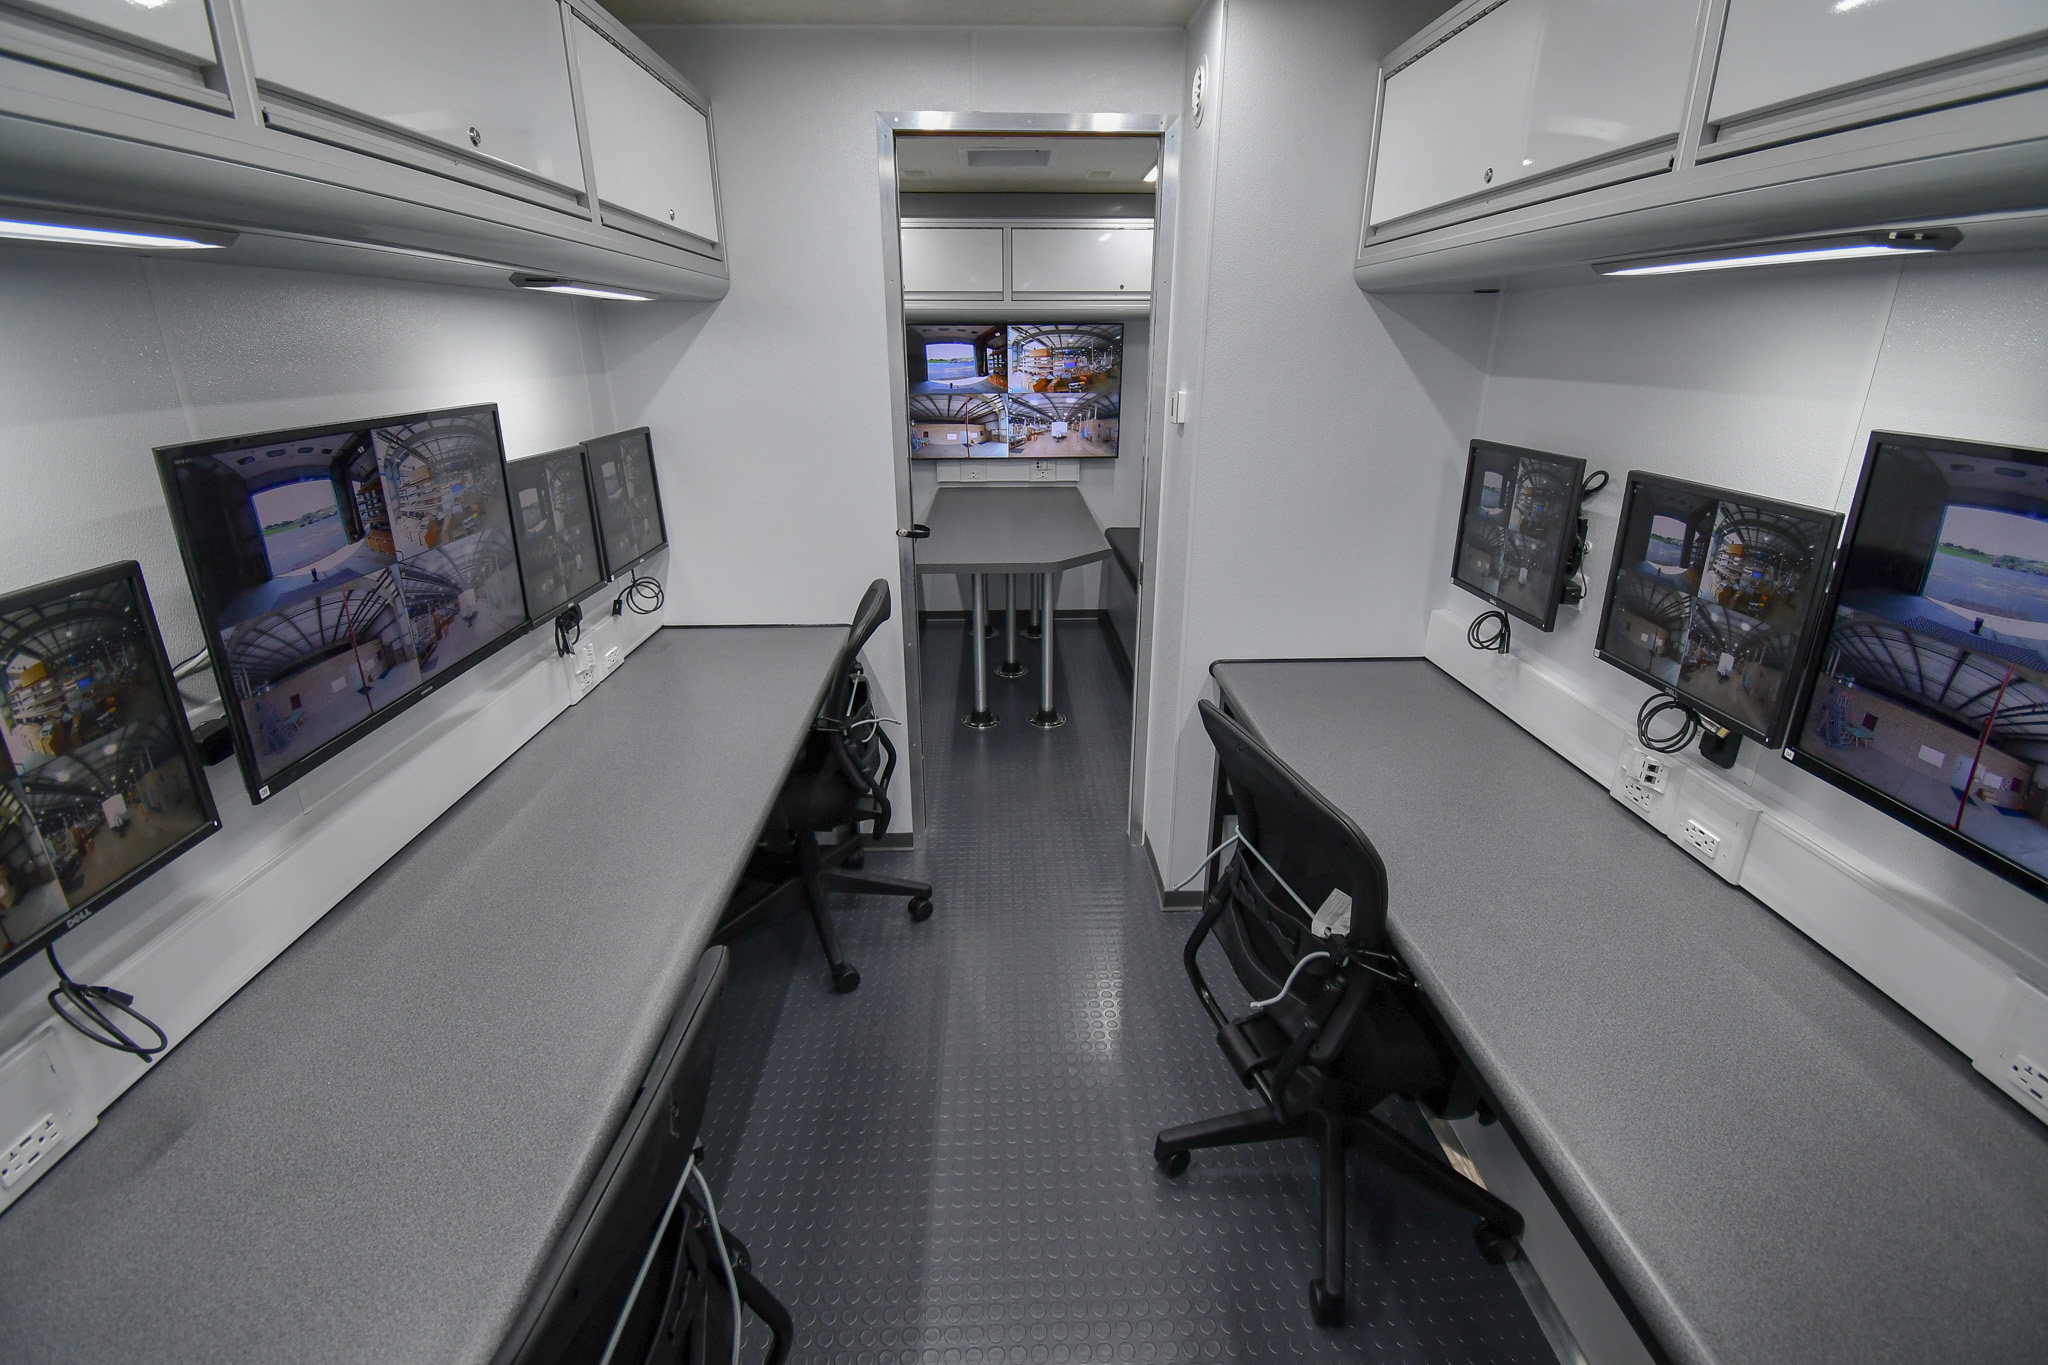 An interior view of the unit for Cookeville, TN with the monitors on.